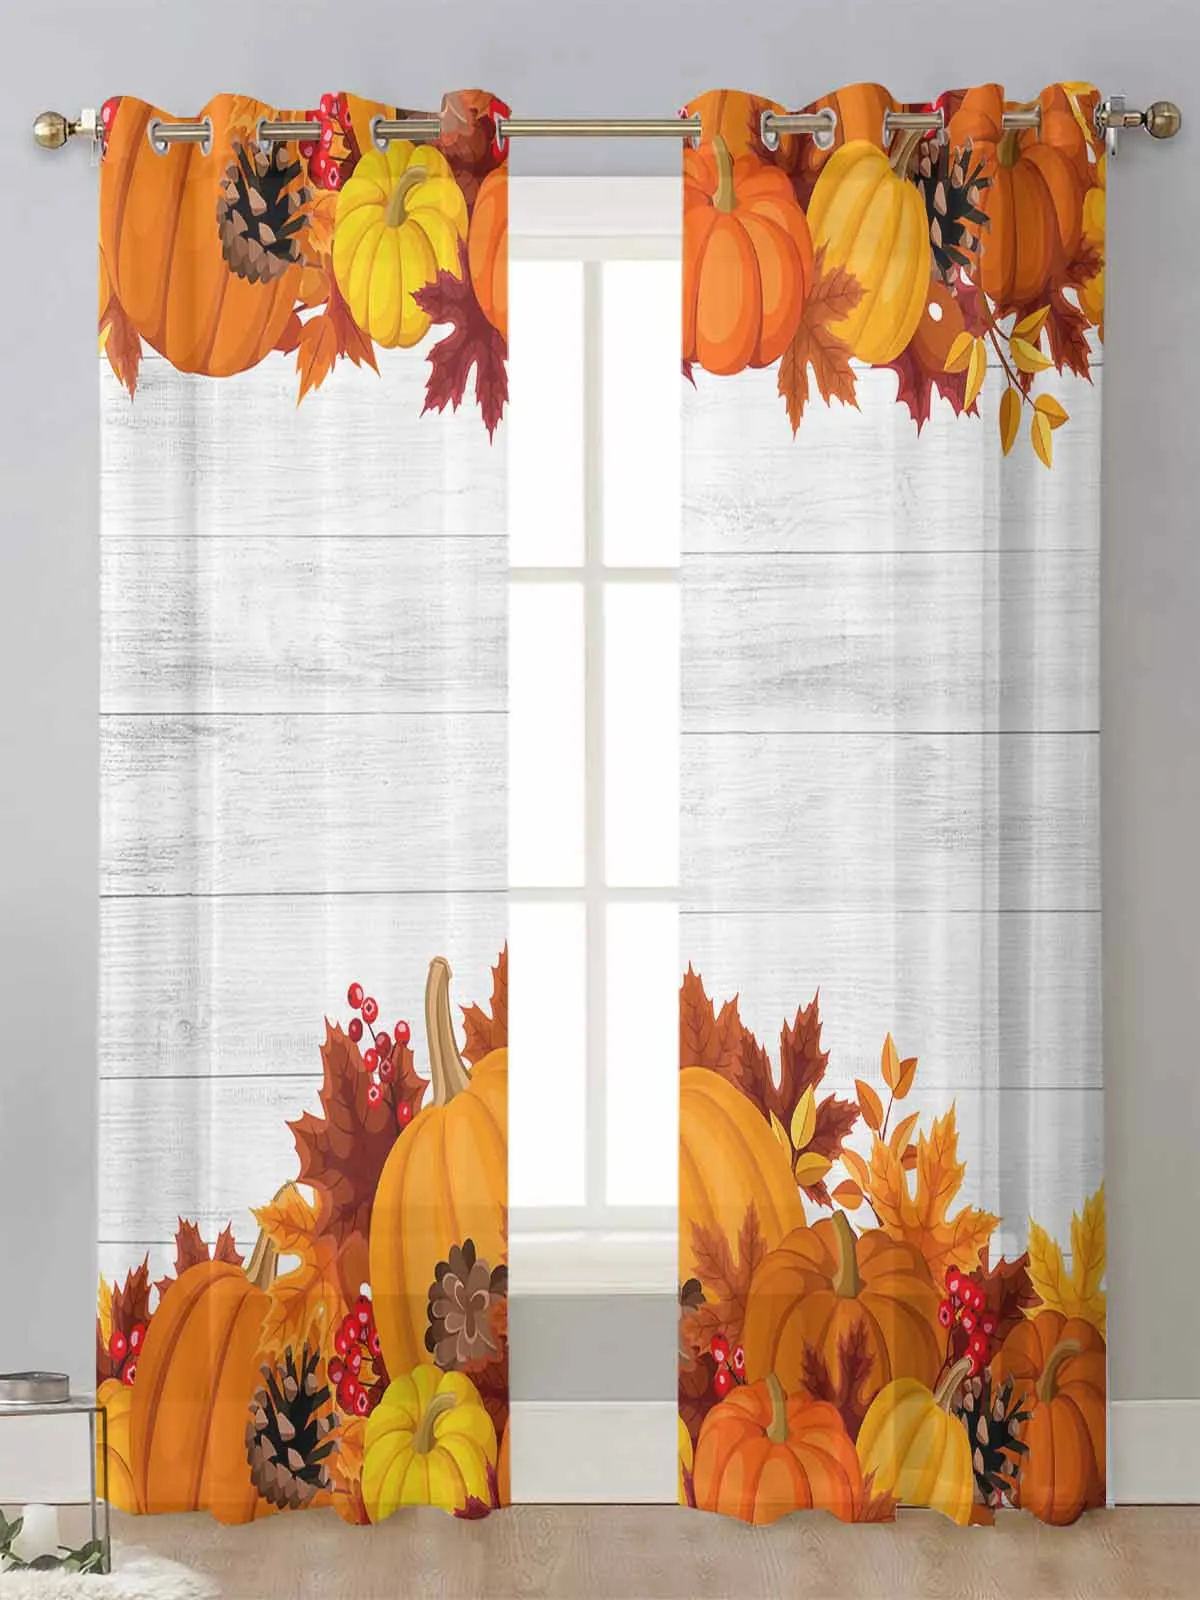 

Thanksgiving Pumpkin Maple Leaf Sheer Curtains For Living Room Window Transparent Voile Tulle Curtain Cortinas Drapes Home Decor